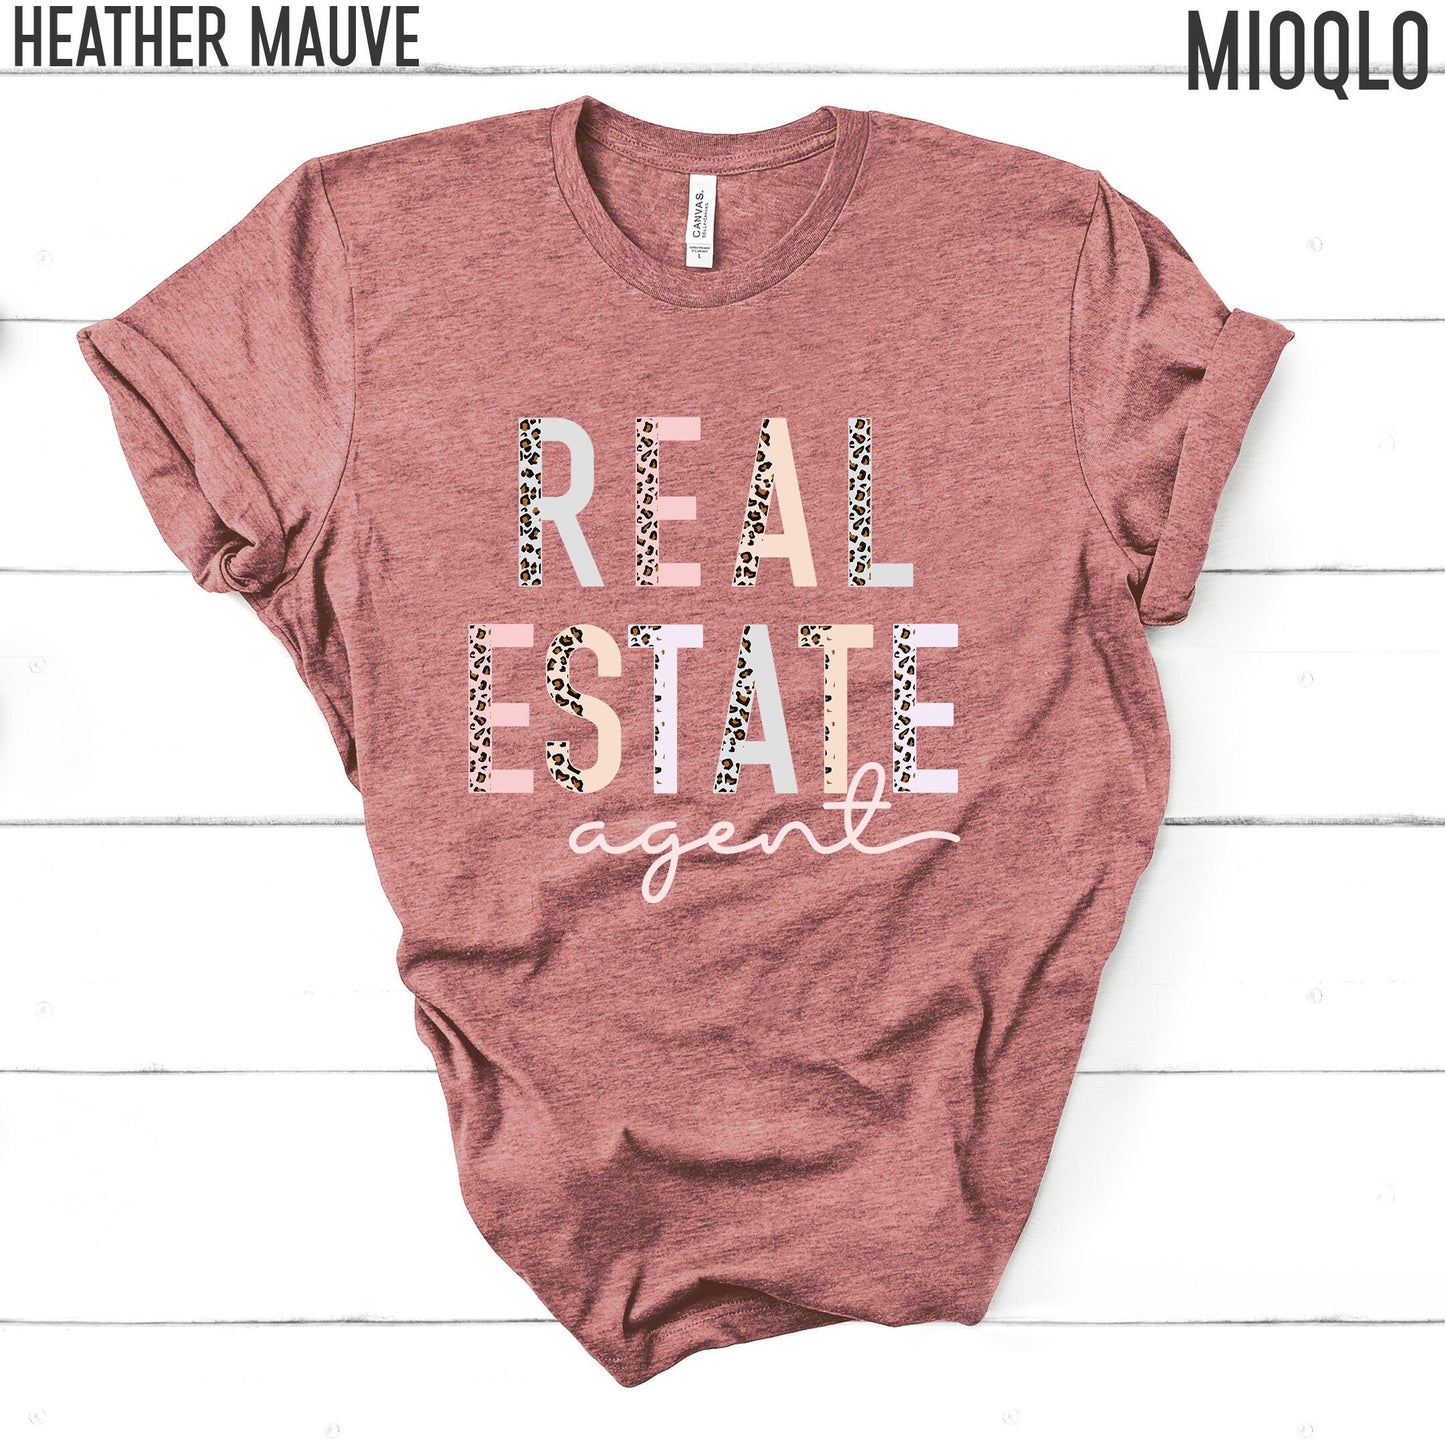 Real Estate Shirt, Half Leopard Pink Shirt, Real Estate Shirts, Real Estate Agent, Real Estate Gift, Real Estate Apparel, Licensed To Sell